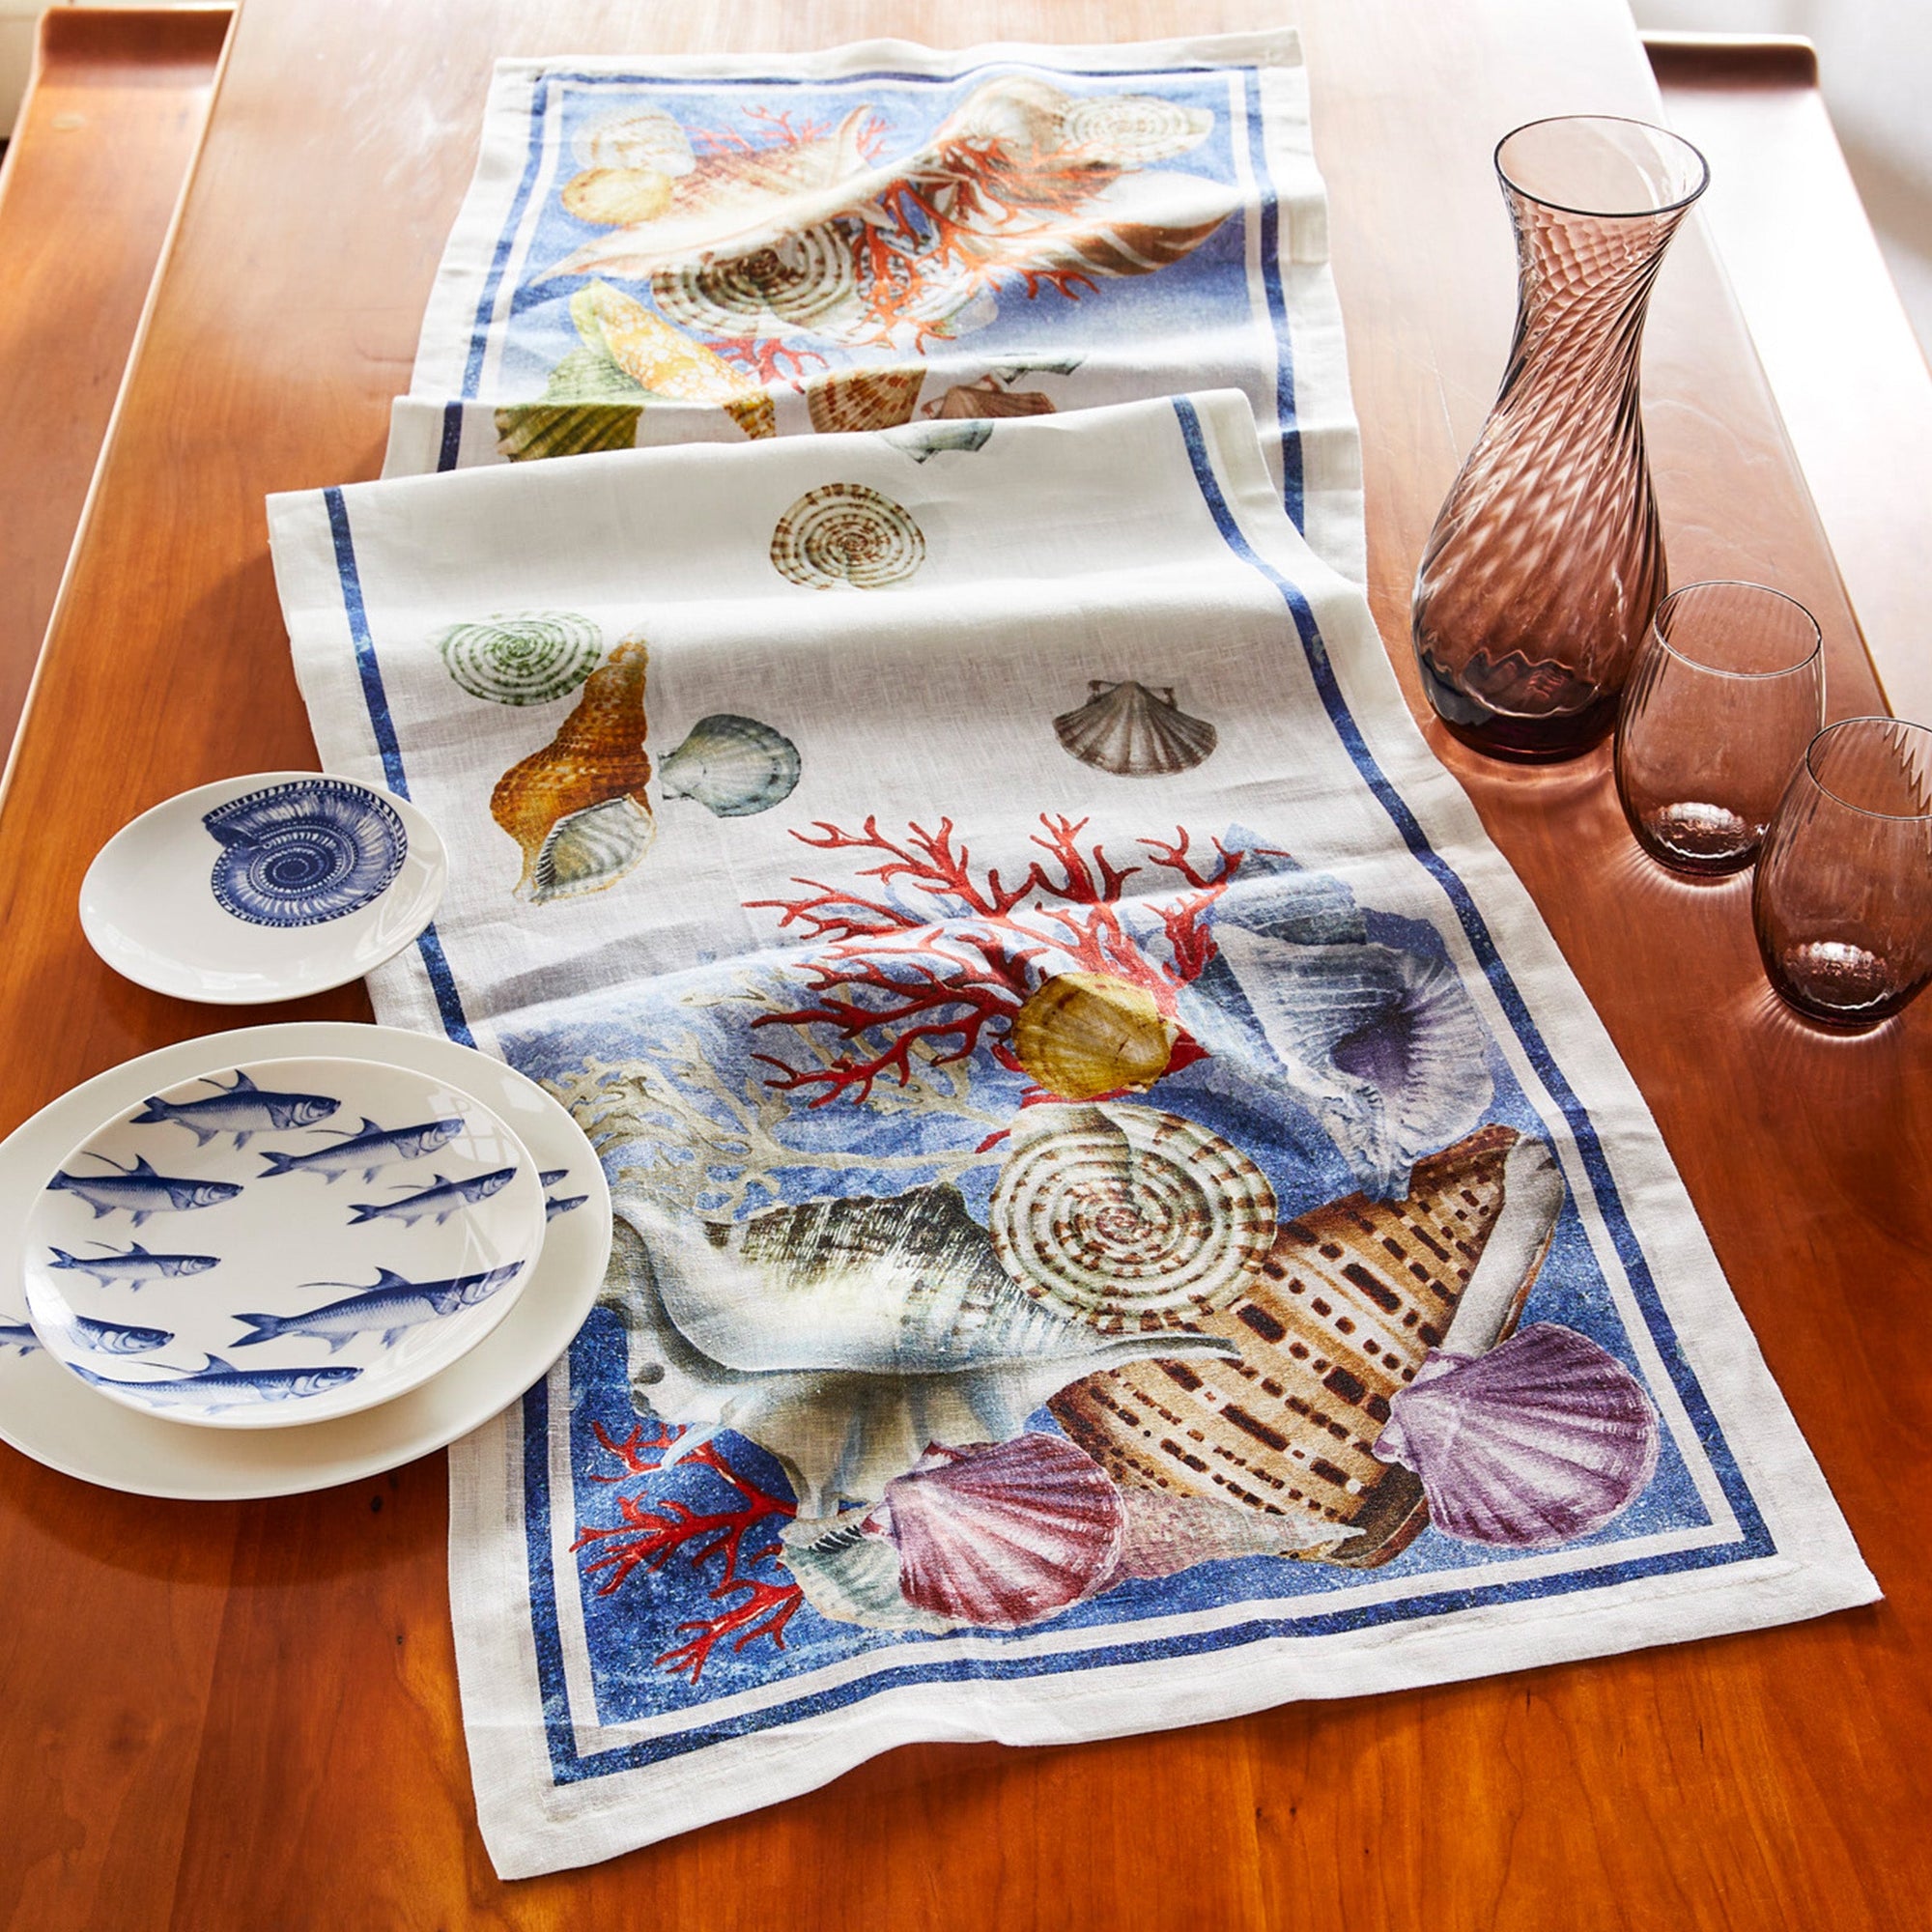 Sanibel Tablecloth Runner with shells and color in watercolors on Italian Linen from Caskata